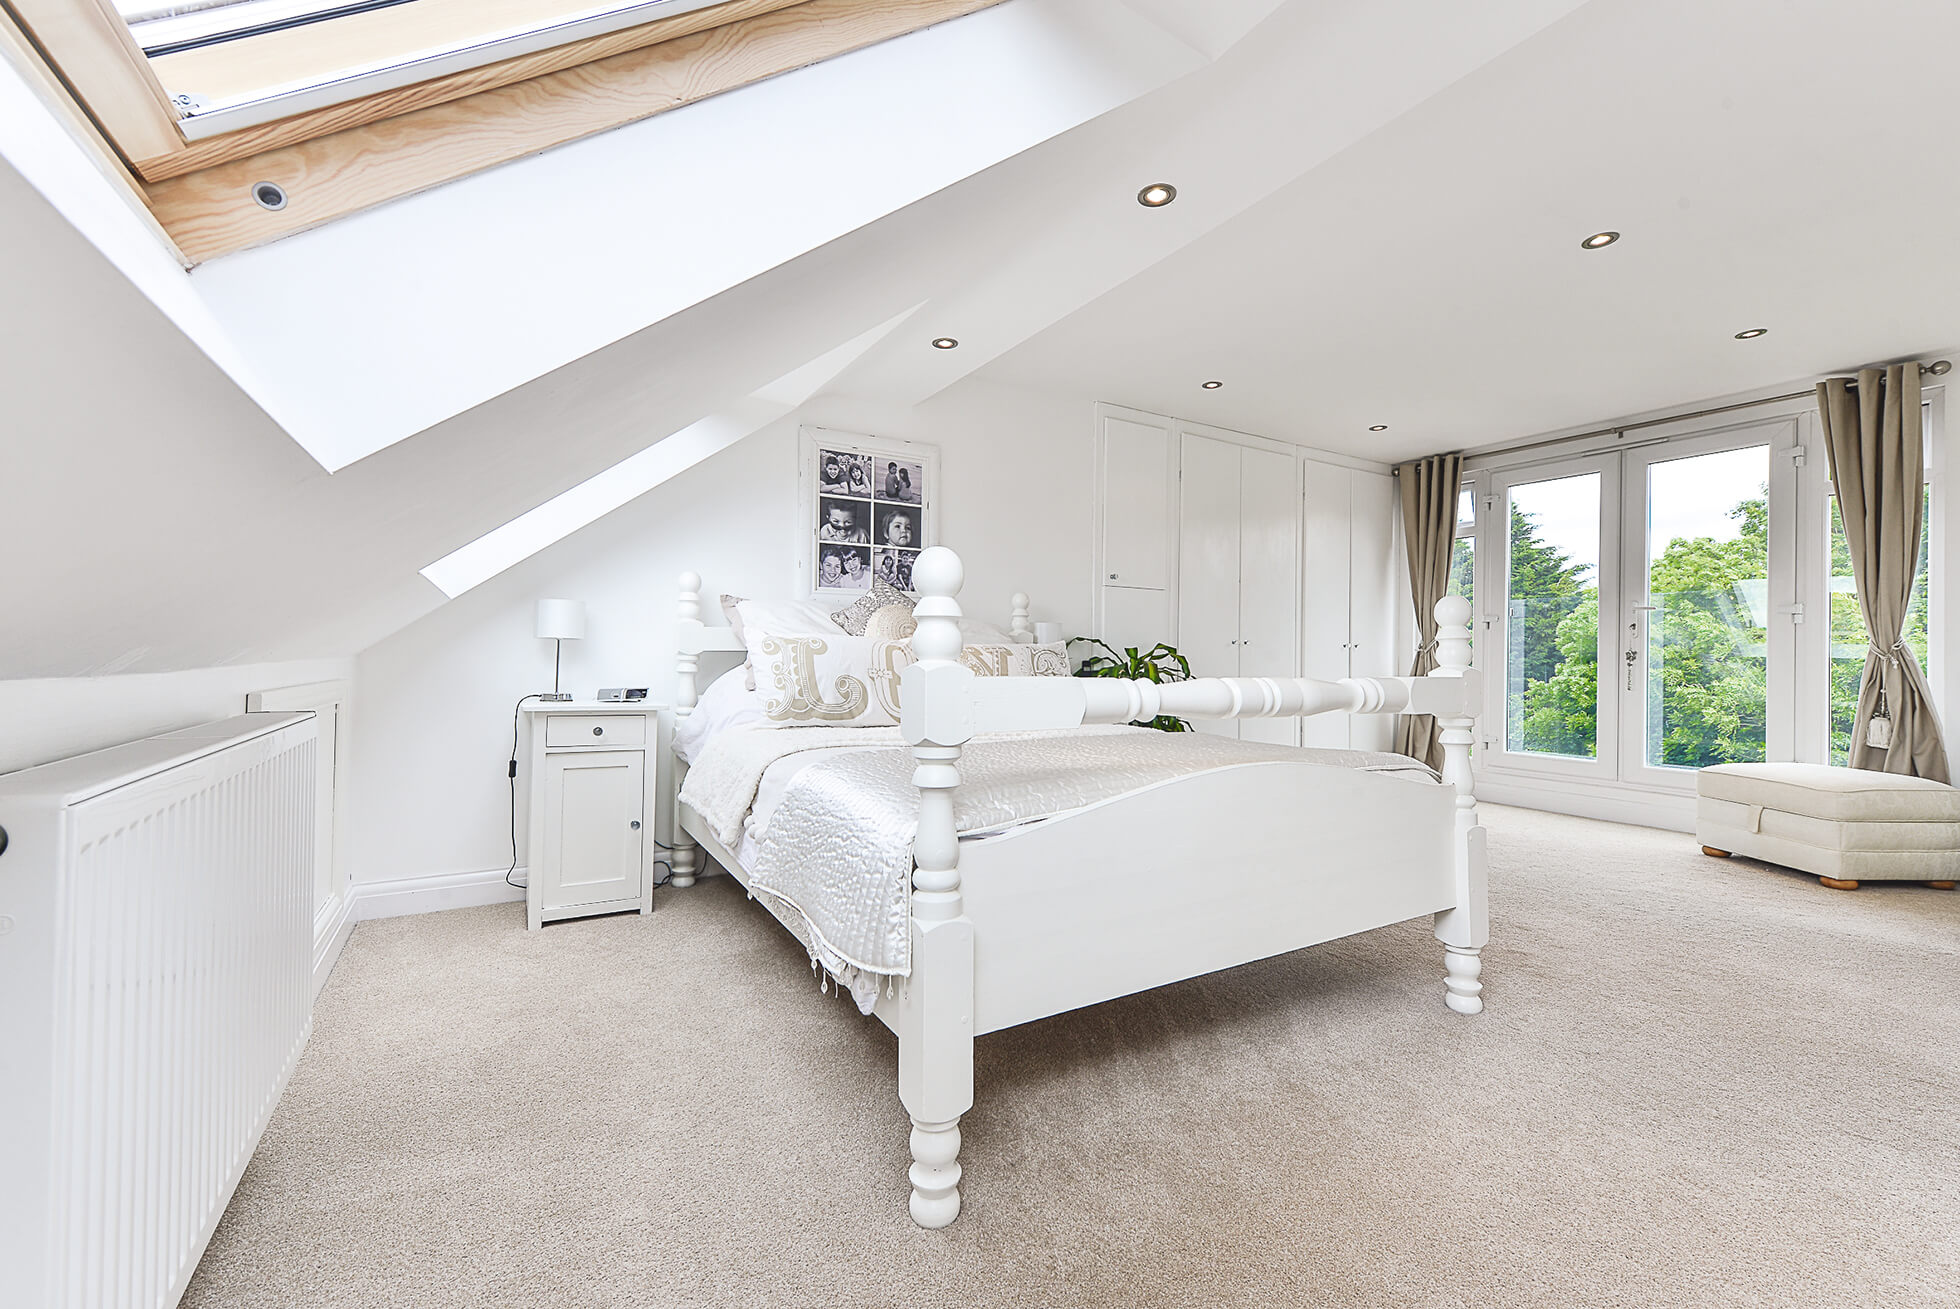 Do you have a question about converting your Loft in Bramfield? Here are the most popular questions asked by our clients.